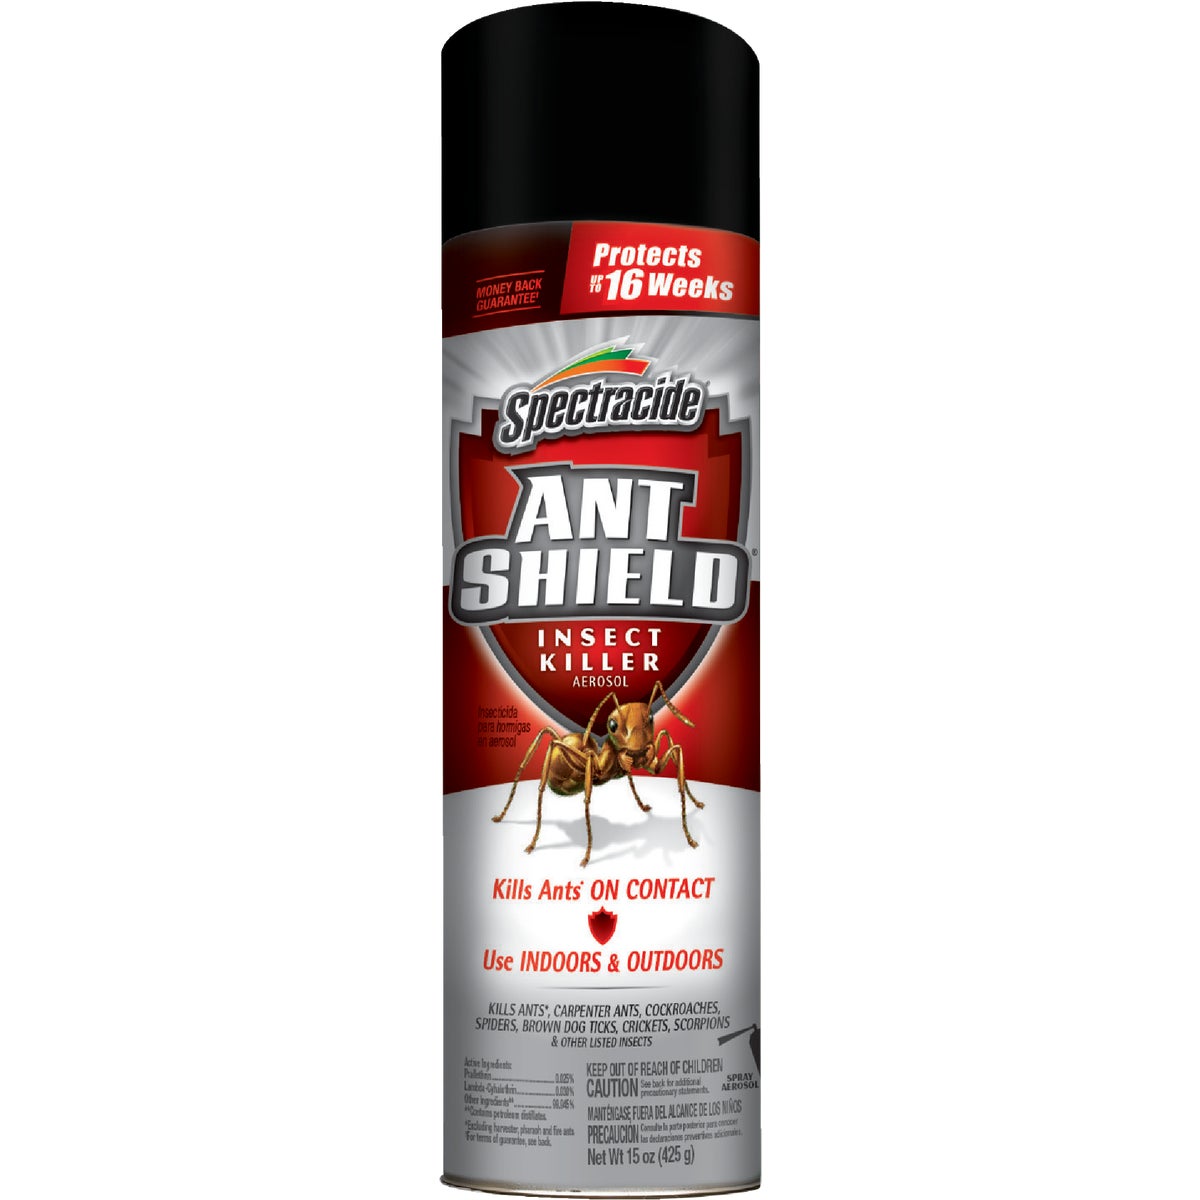 Item 723665, Kills carpenter ants, ants, spiders, beetles, fleas, and other listed 